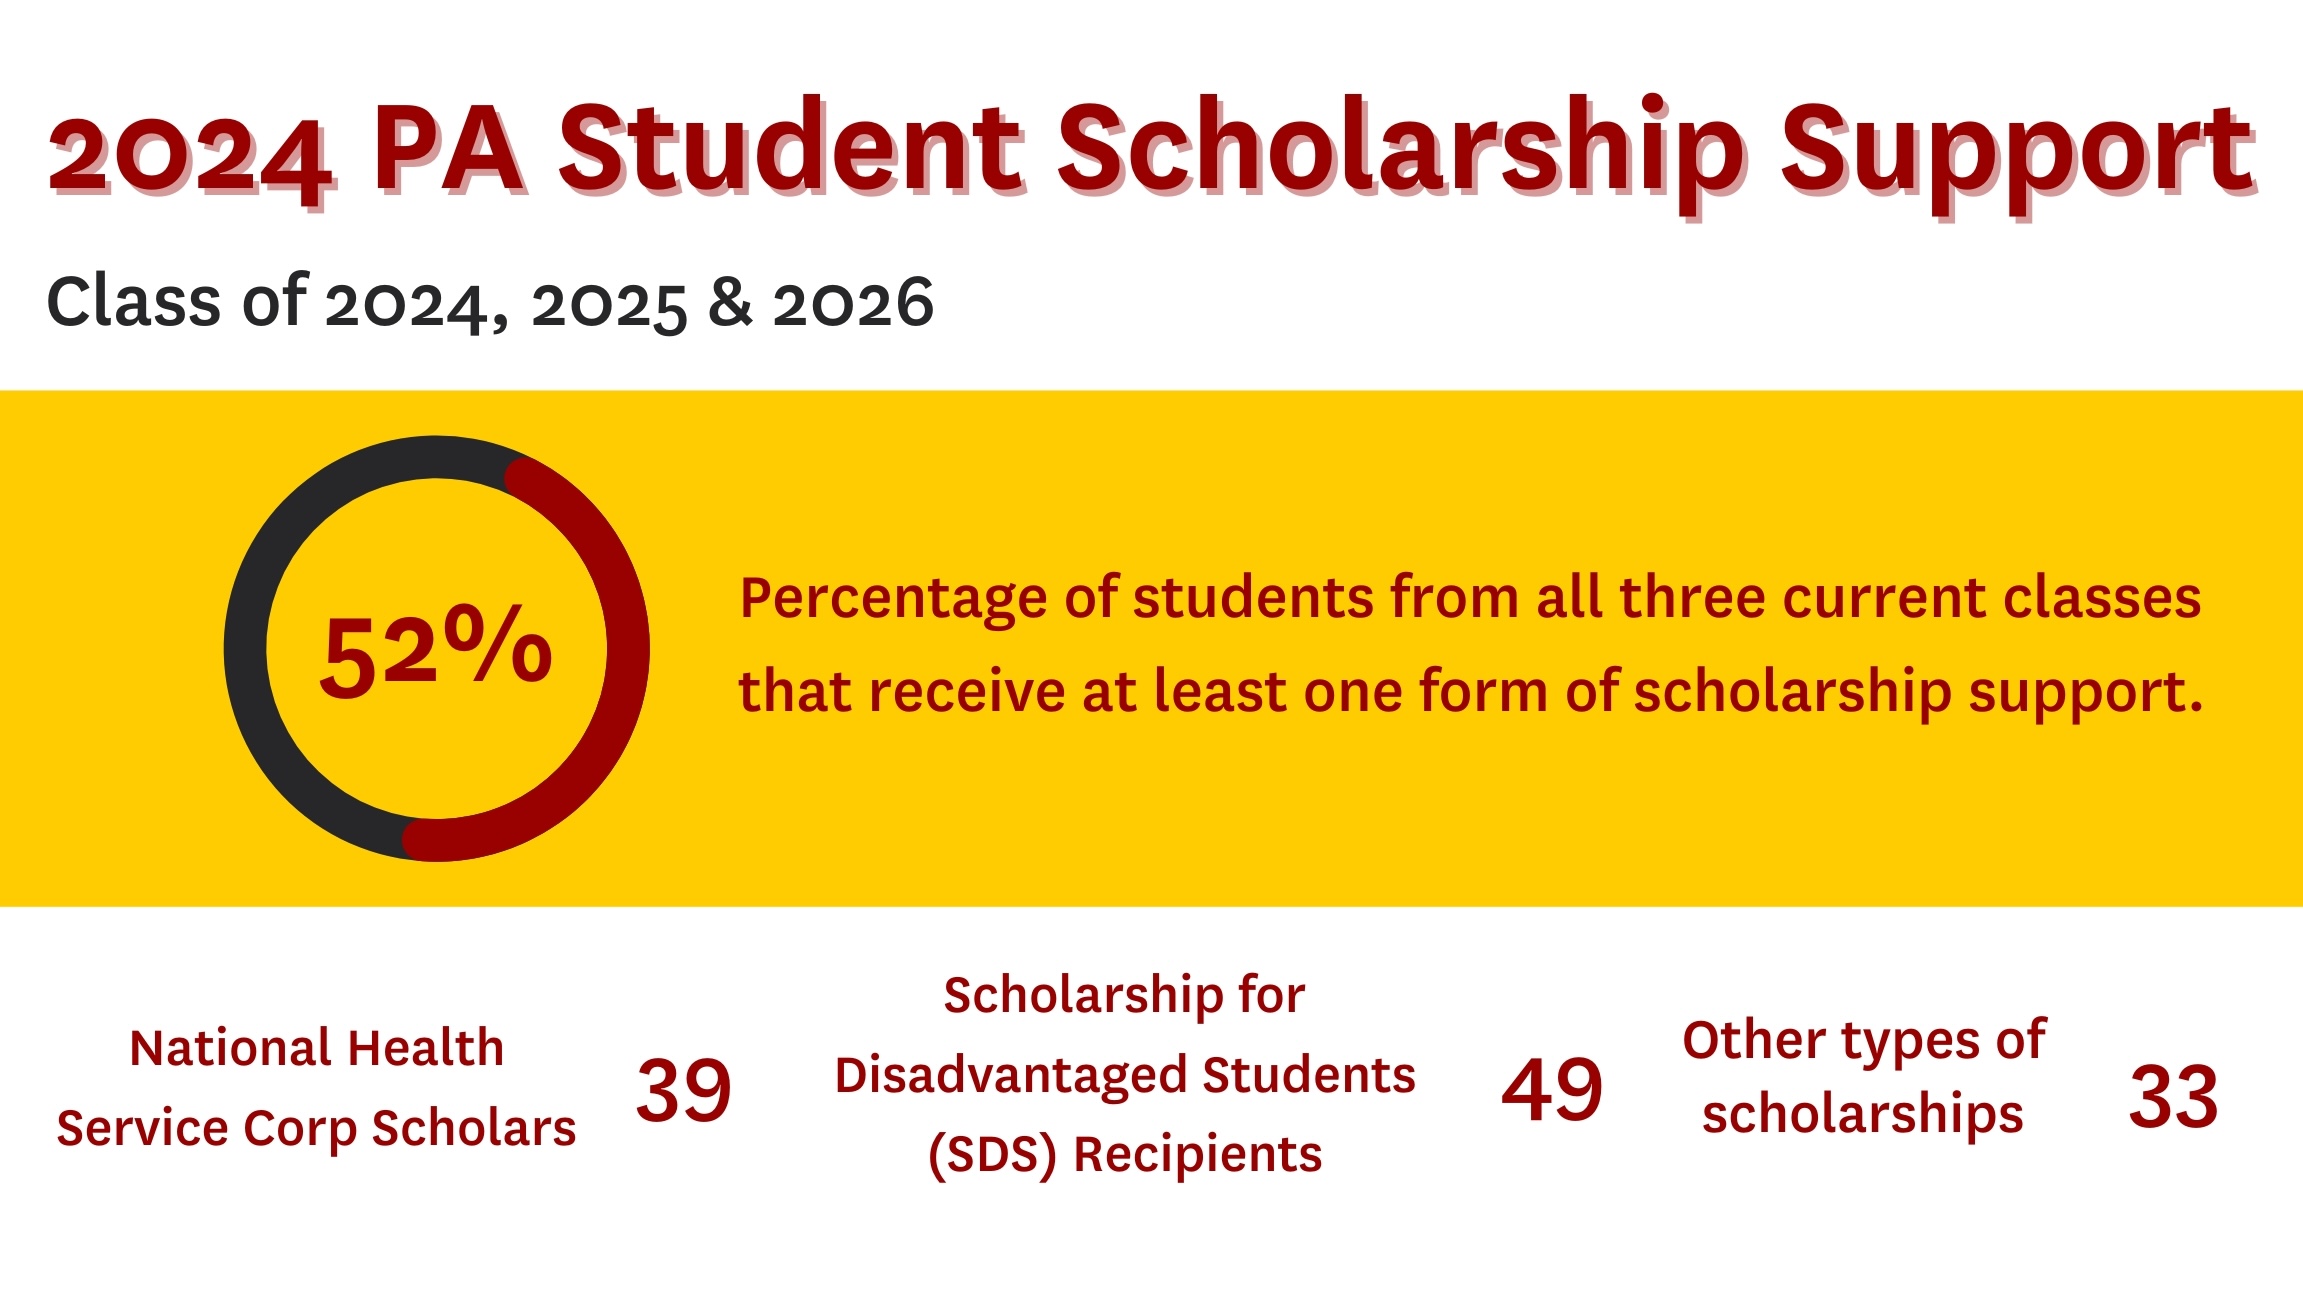 The image shows the scholarship statistics for the current PA cohorts.